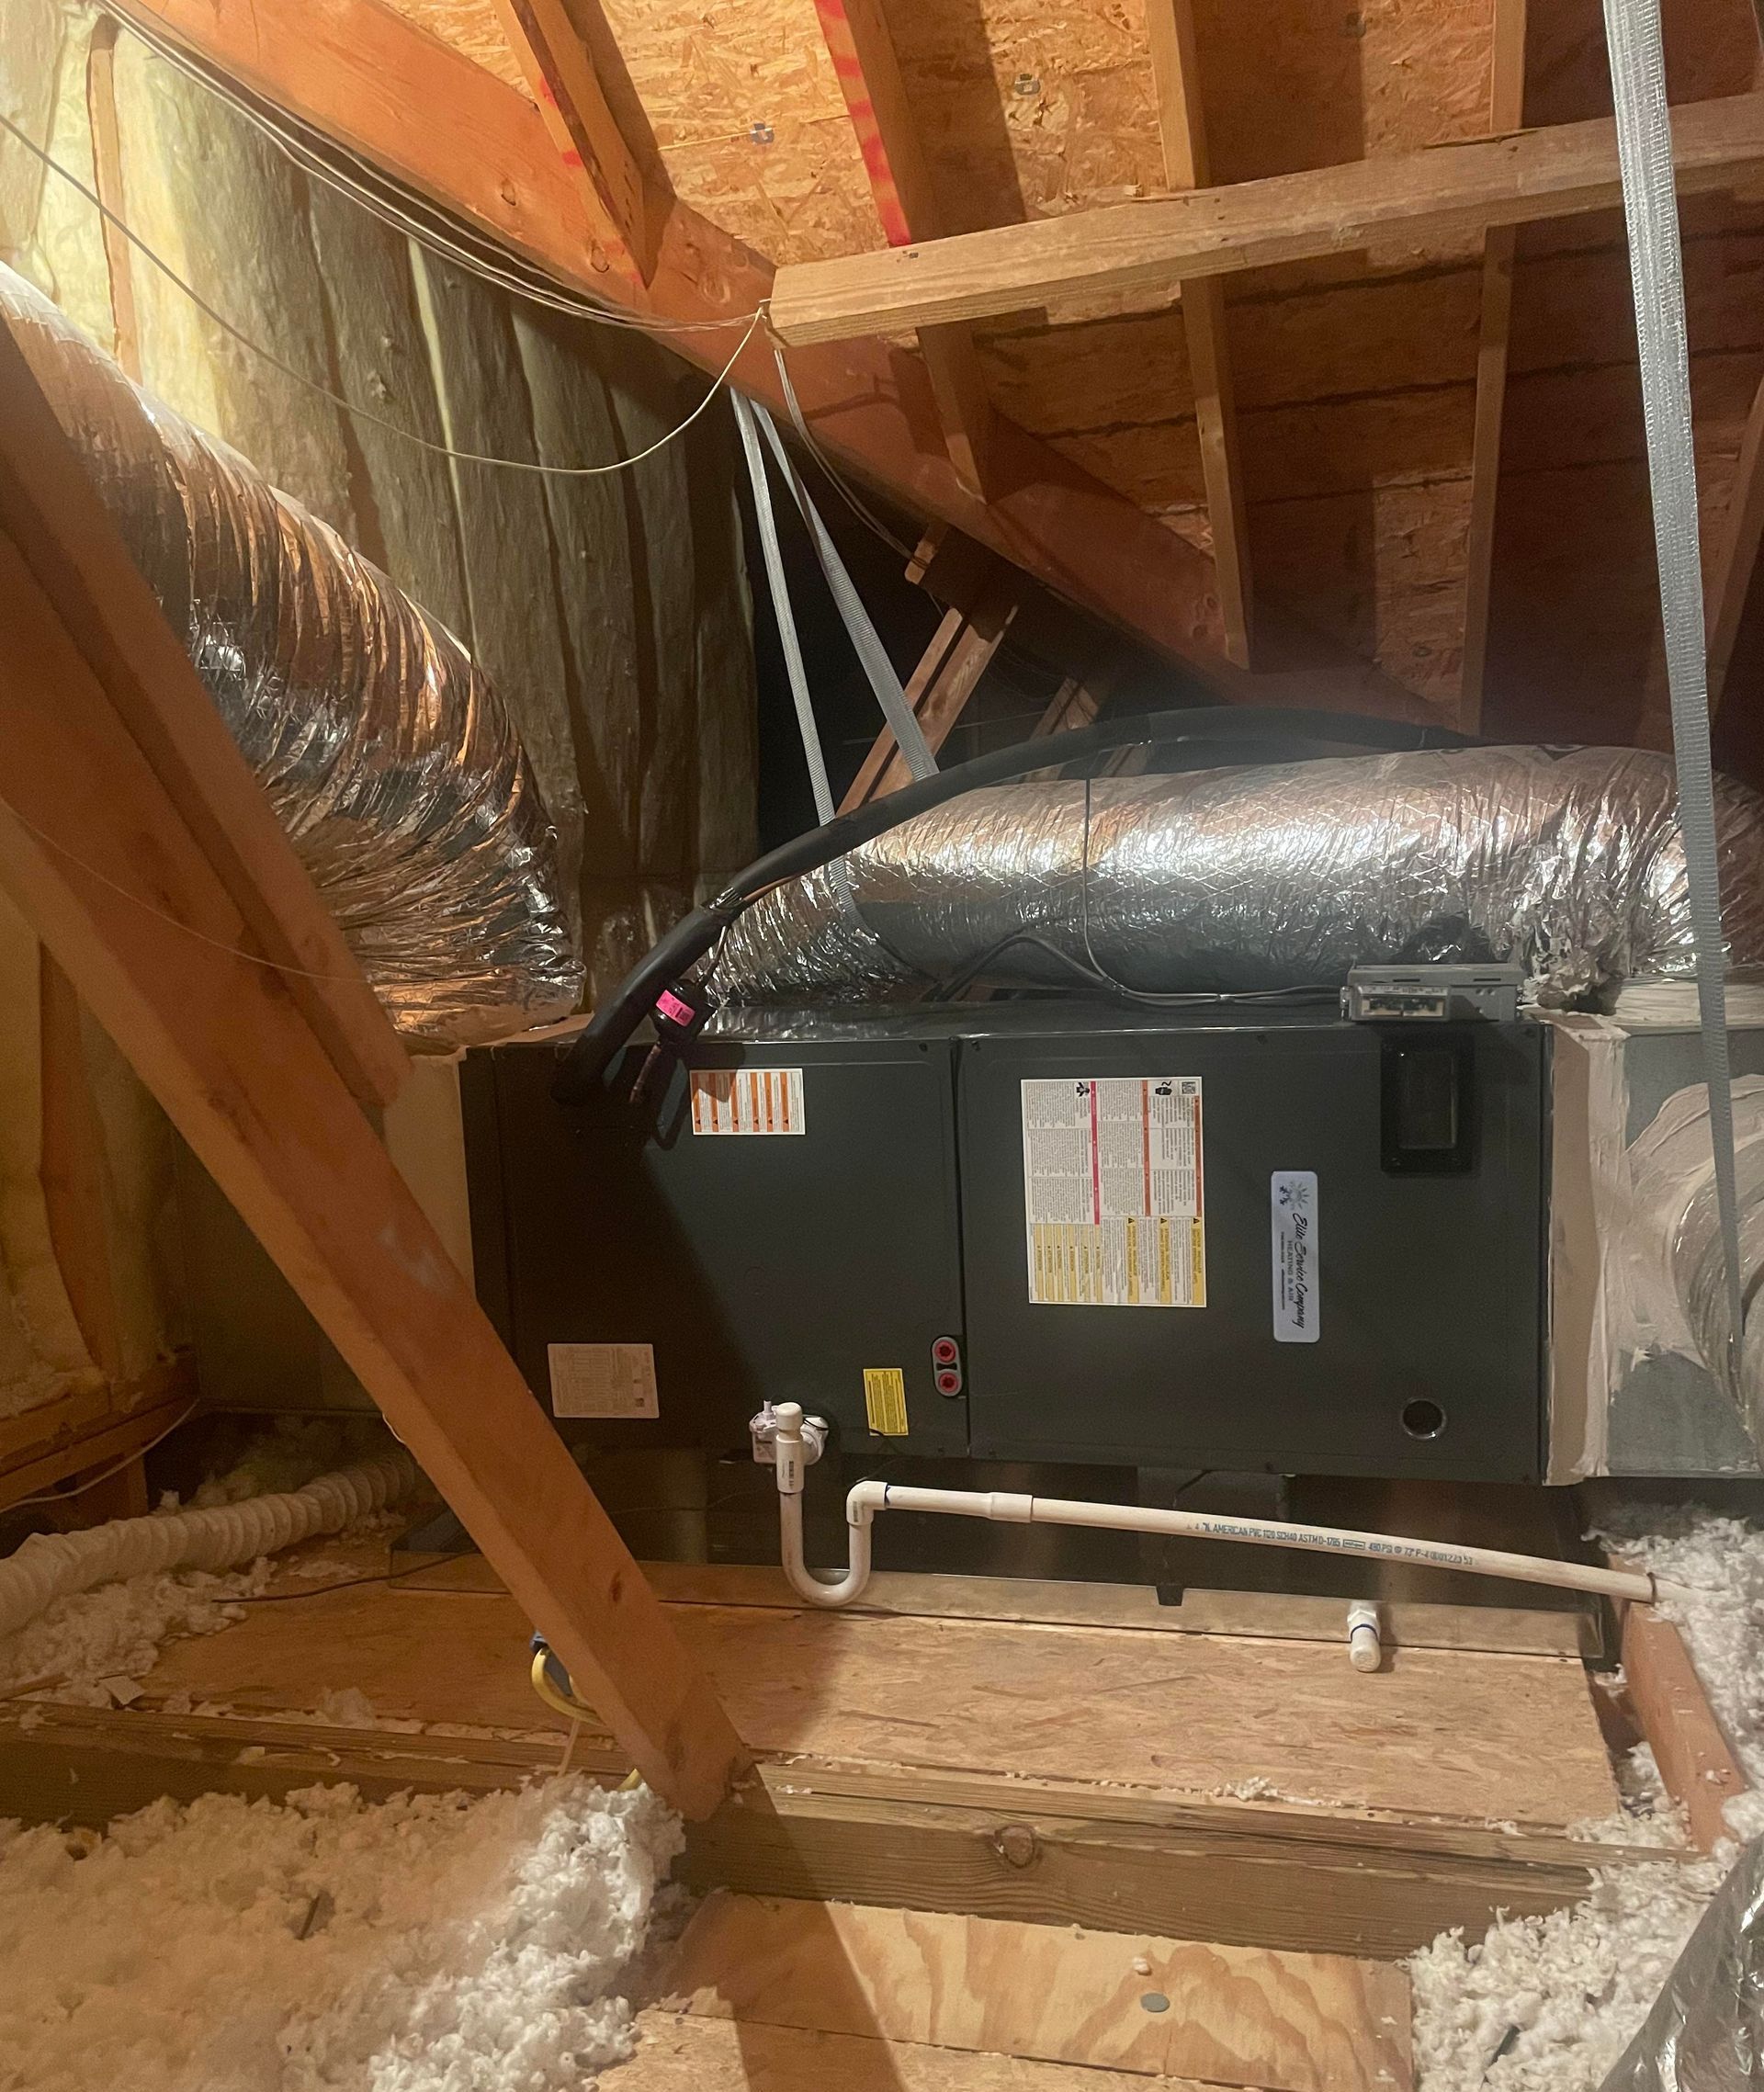 An air conditioner is installed in the attic of a house.